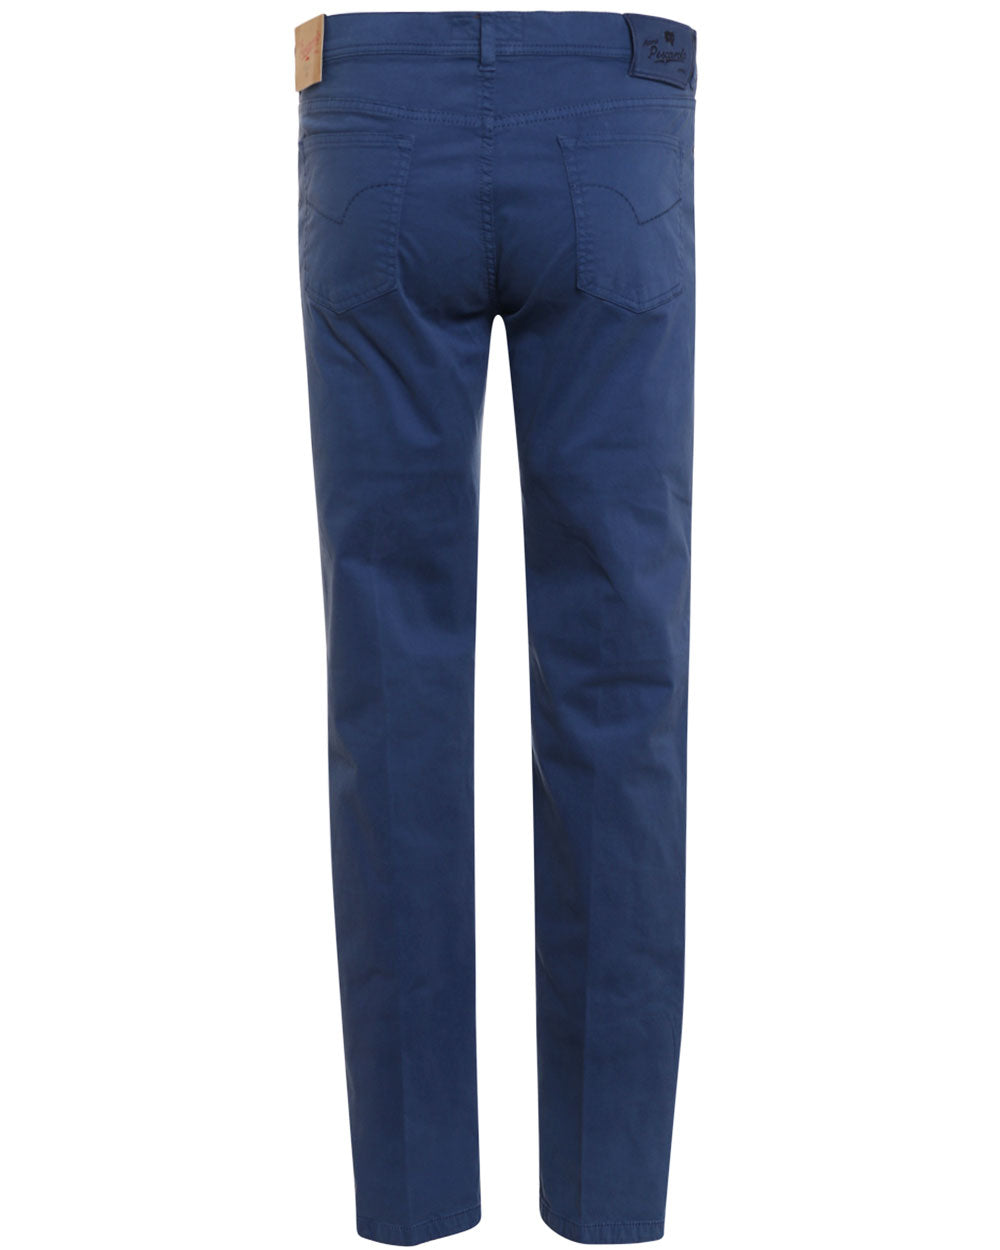 Royal Blue Sueded Supima Cotton Casual Pant